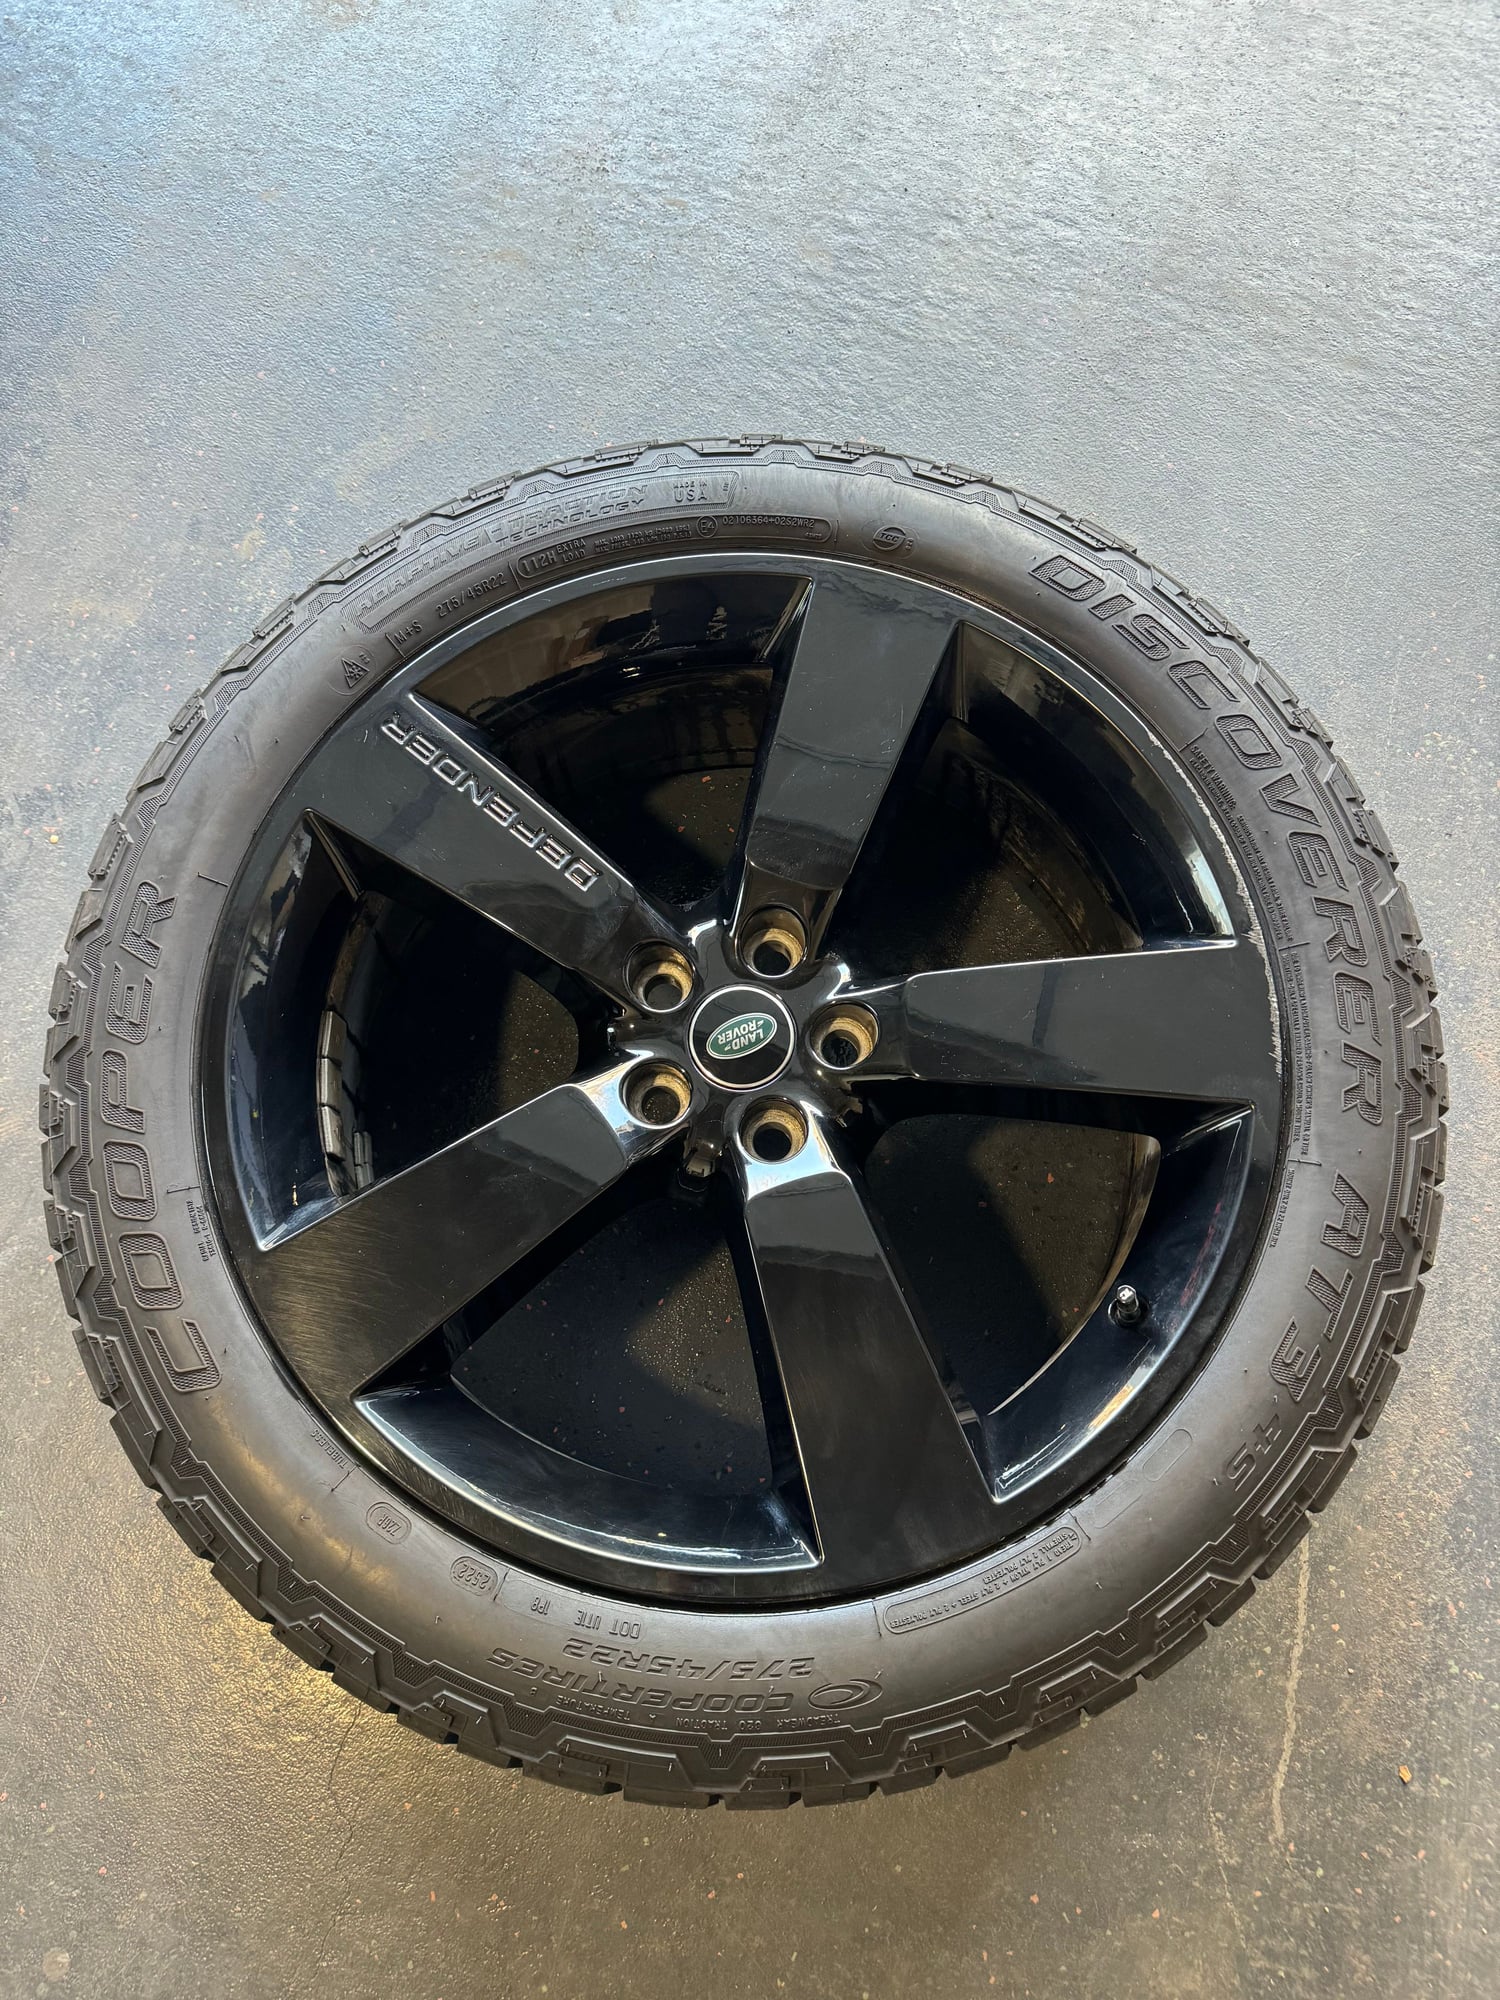 Wheels and Tires/Axles - Land Rover Defender 22" Style 5098 Gloss Black, Cooper AT3 4S Tire,  Includes Spare - Used - All Years  All Models - Denver, CO 80204, United States